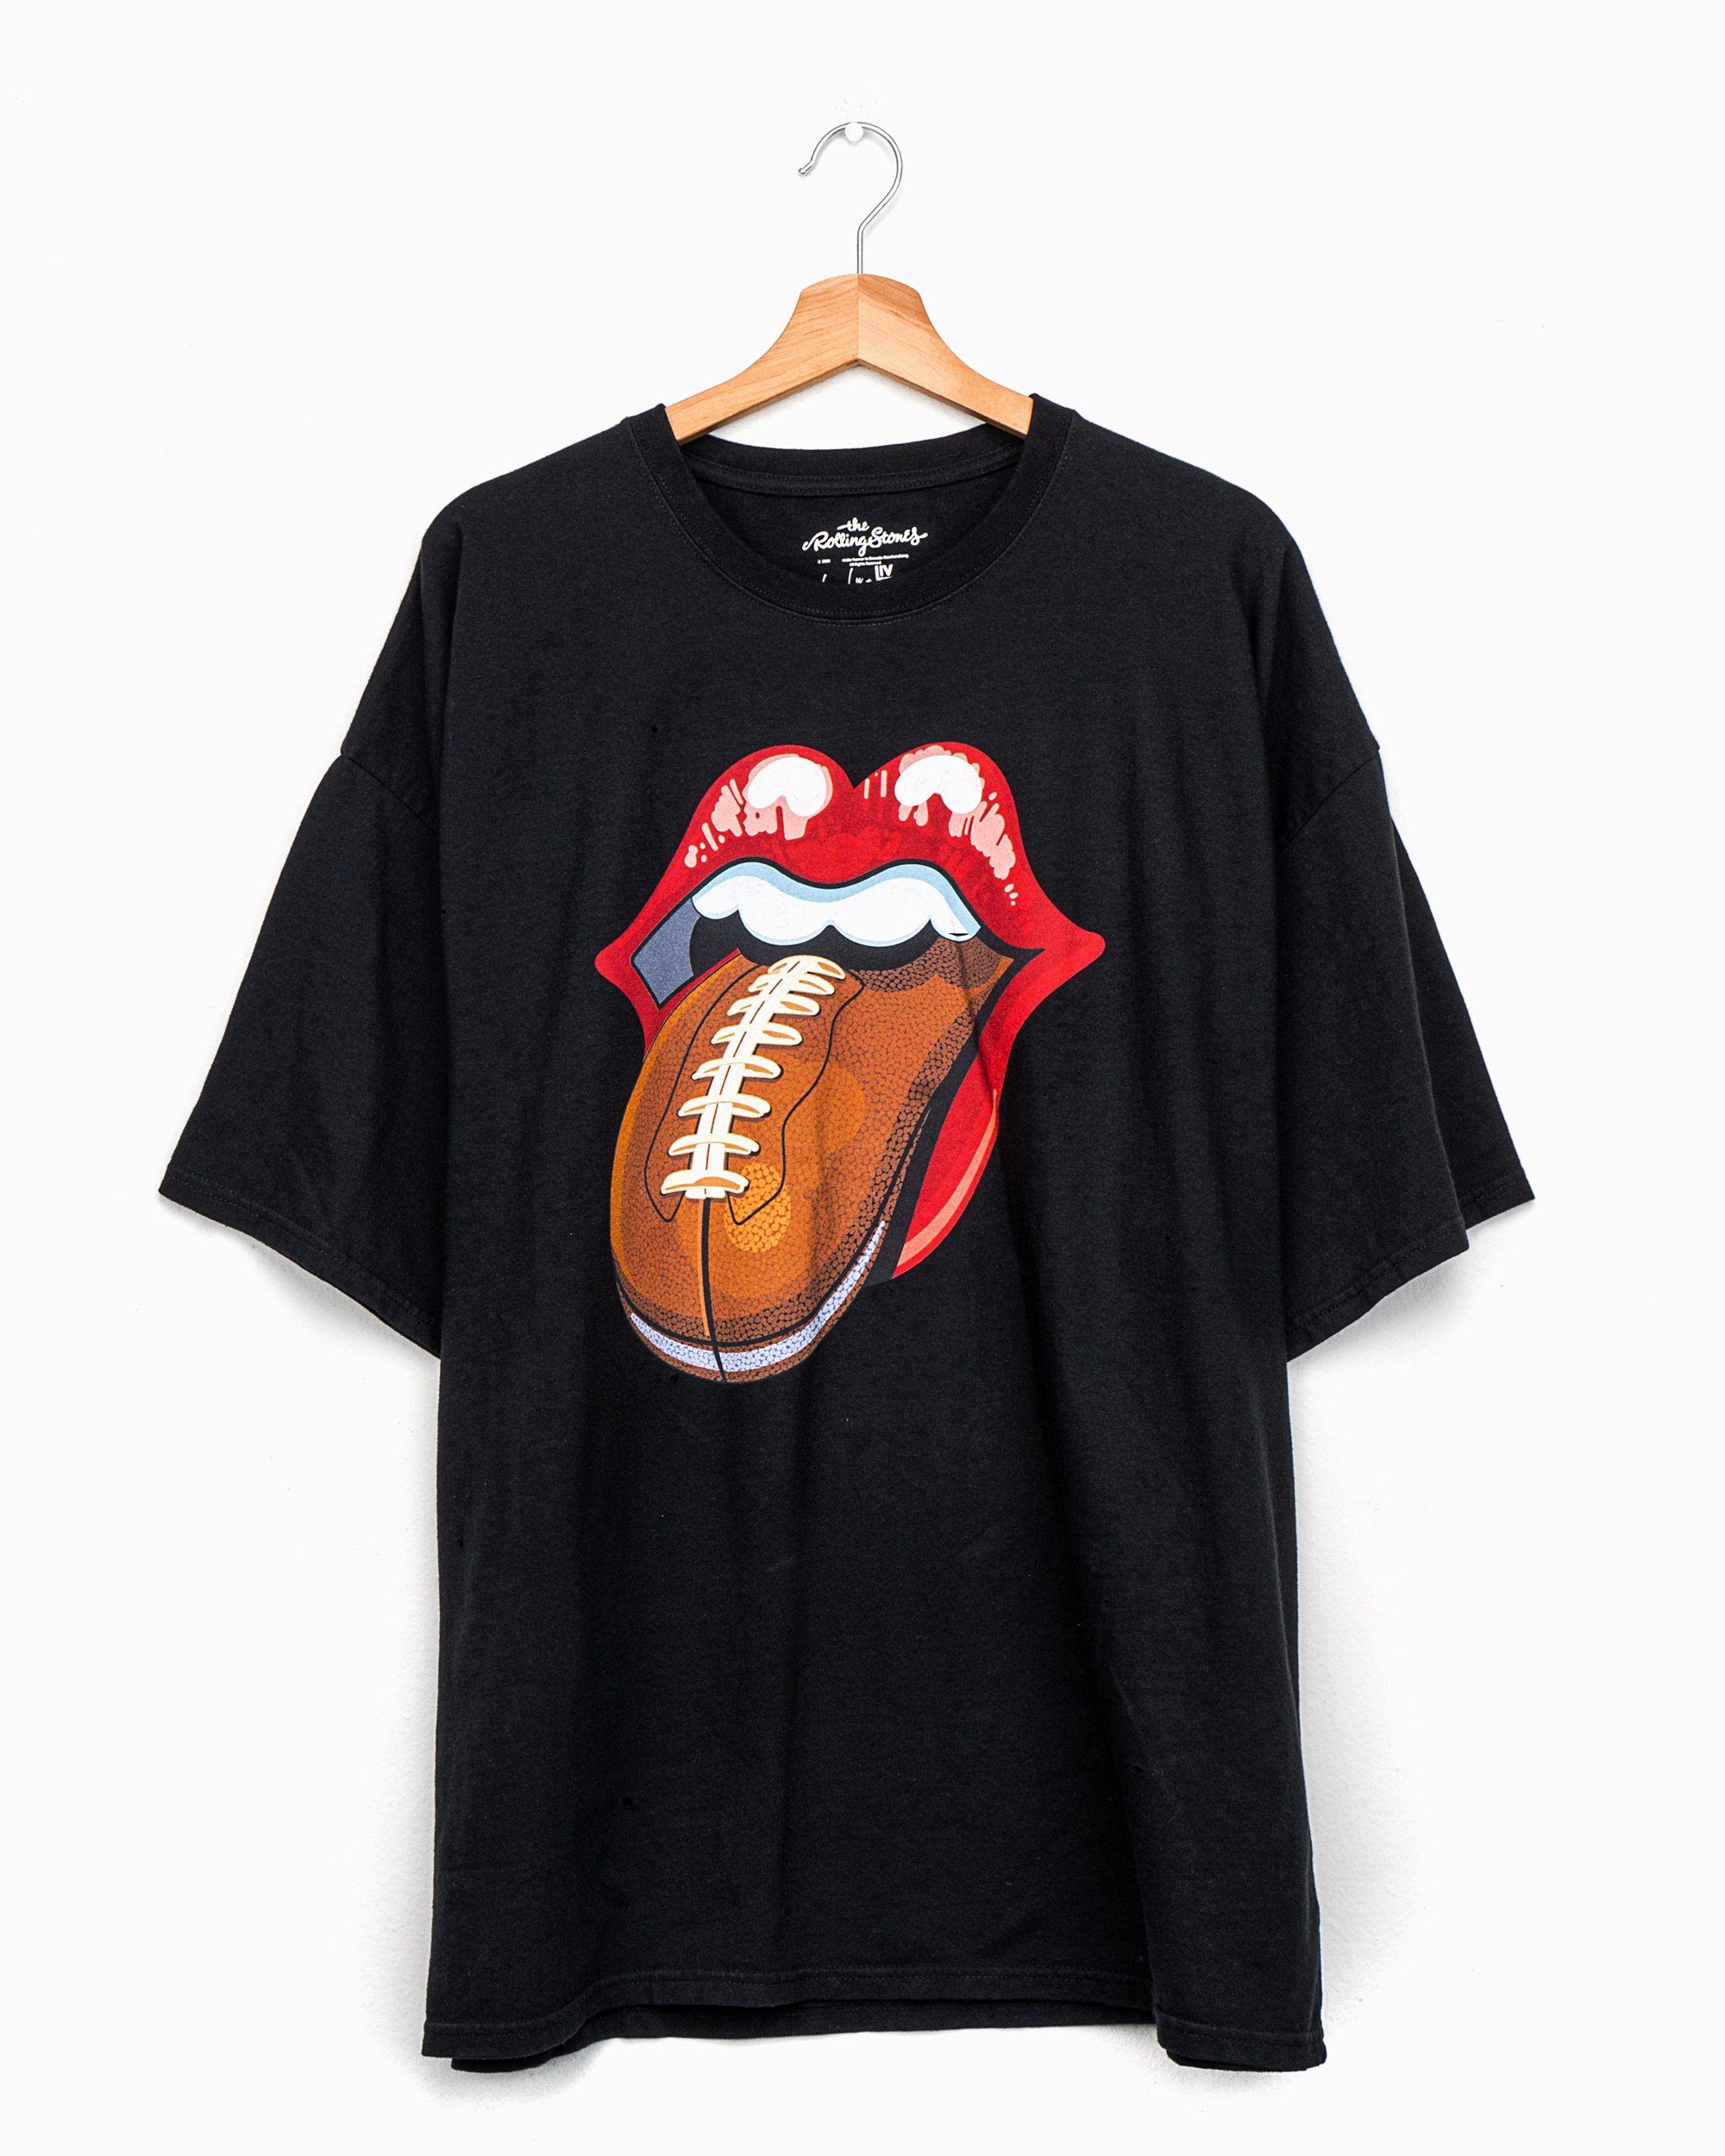 Rolling Stones Football Lick Off Black Oversized Distressed Tee (4512417284199)